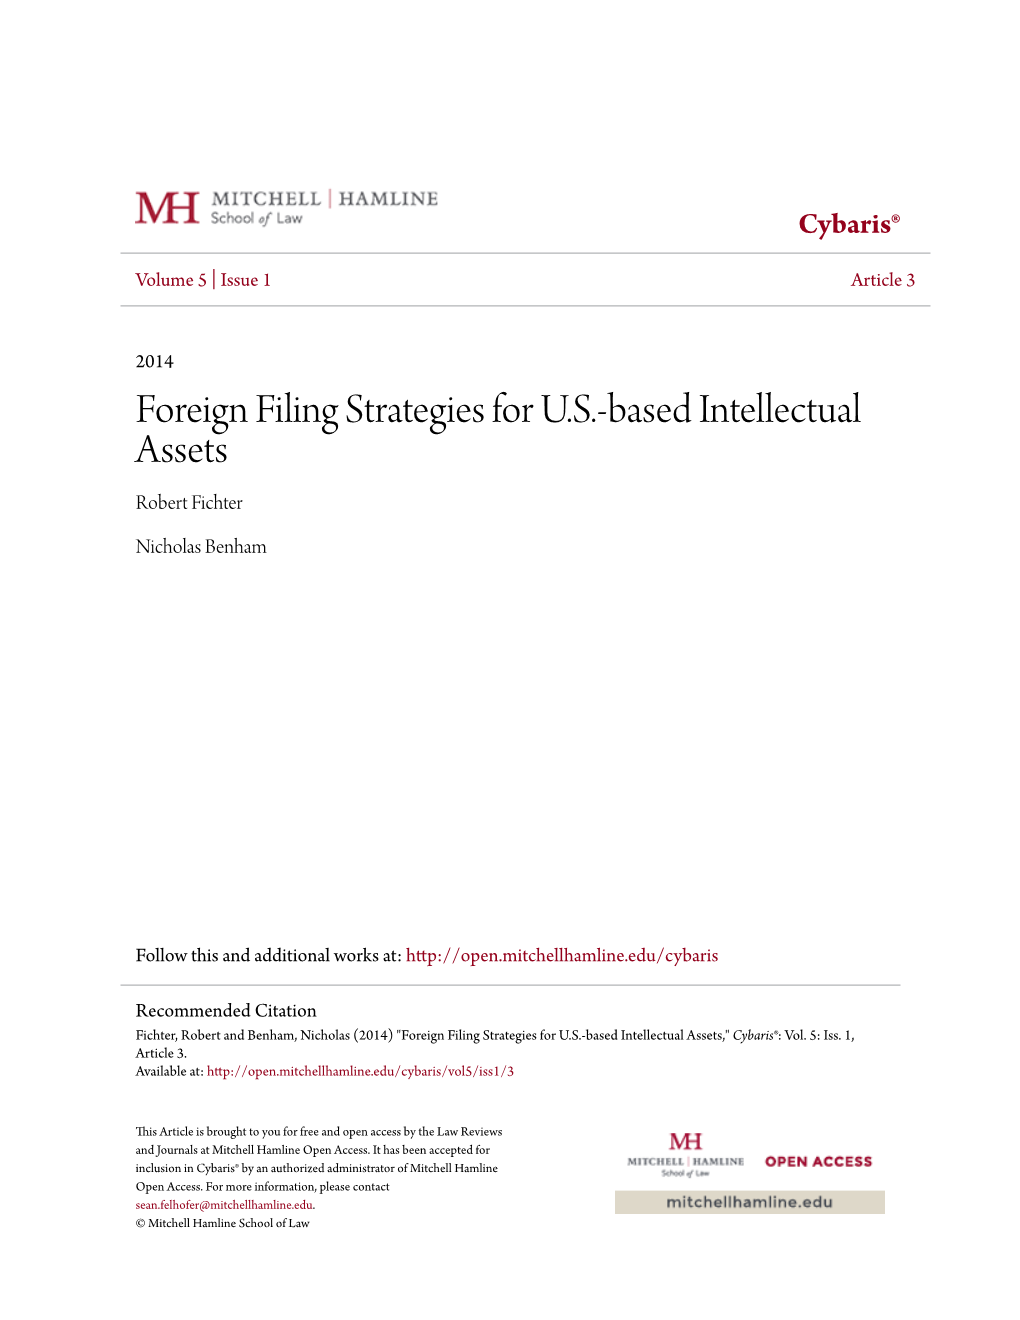 Foreign Filing Strategies for U.S.-Based Intellectual Assets Robert Fichter